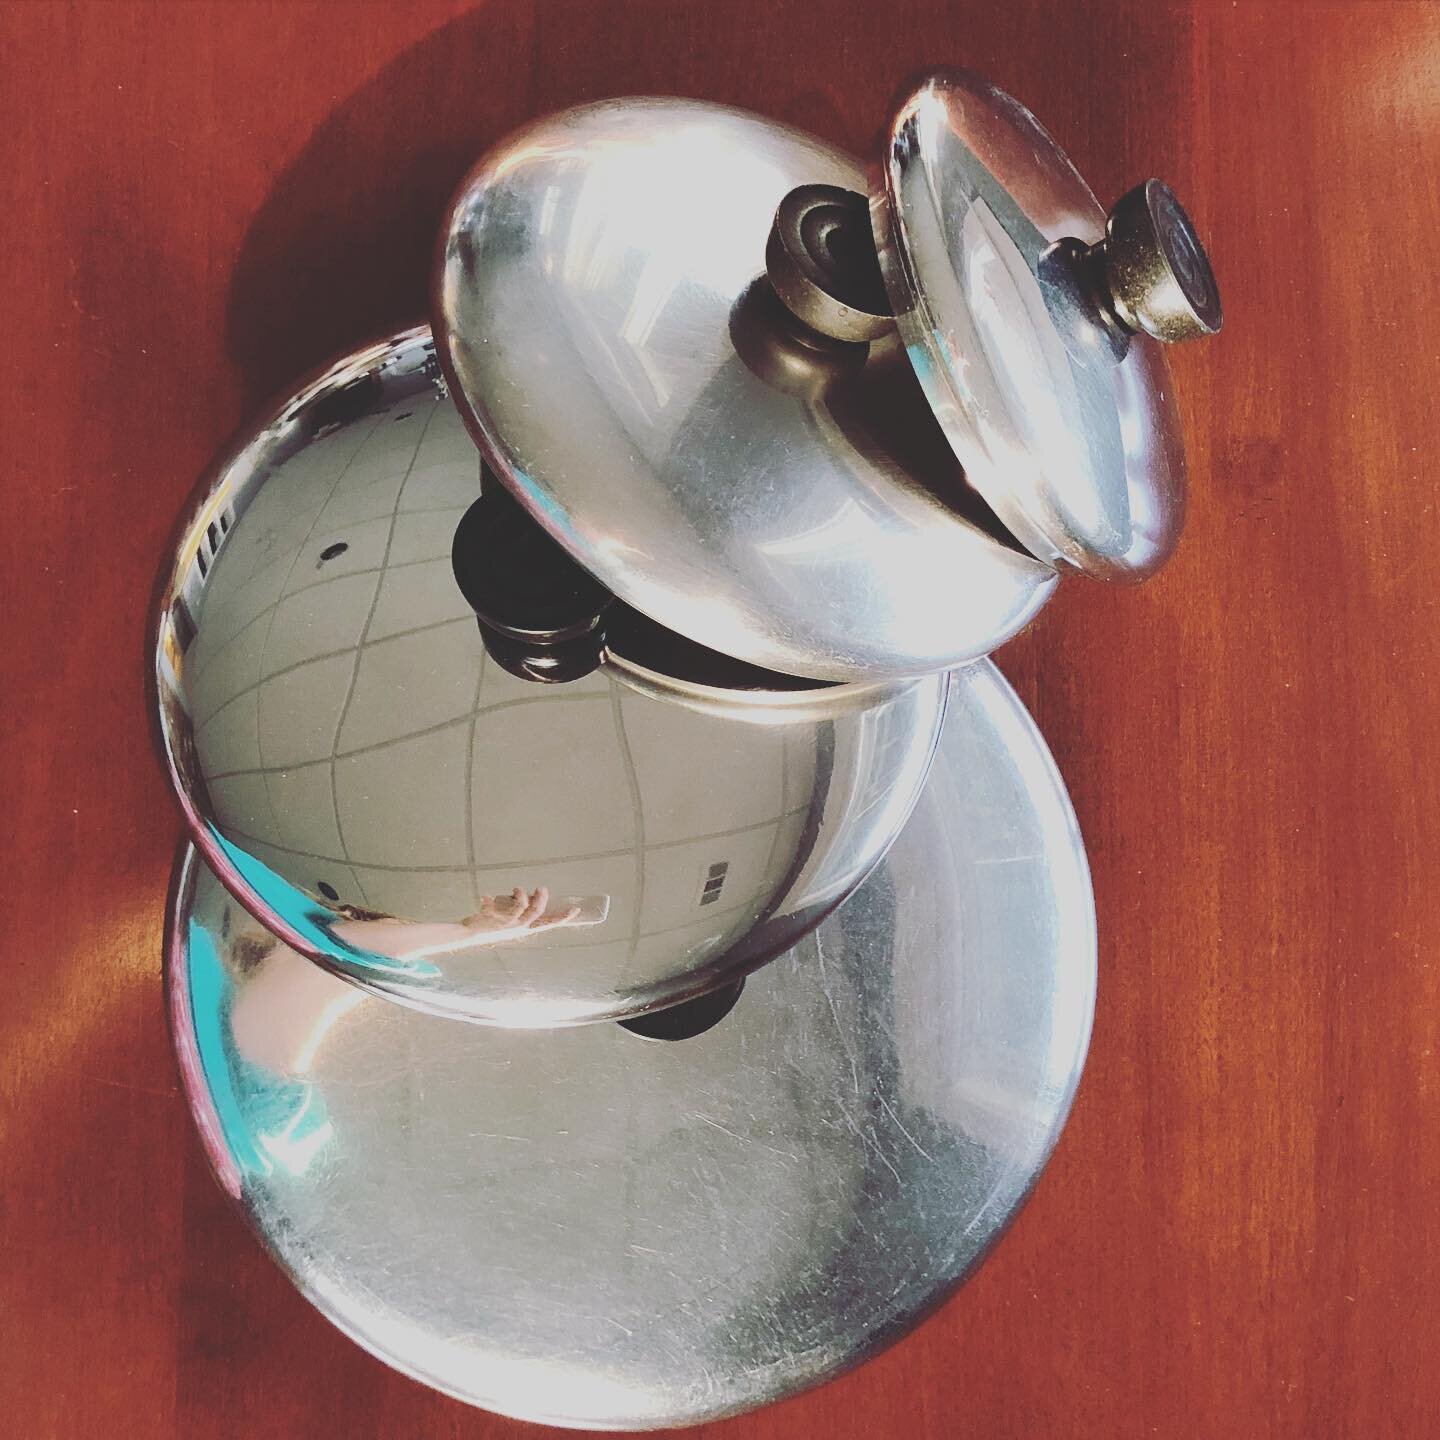 Lids for pots part 1 #kitchen #pots #lids #cooking #stovetop #stew #cookware #kitchenware #ungratefulgranddaughter 

#forsale #garagesale #fleamarket #selling #stuff #secondhand #reuse #reduce #recycle #upcycle #connecticut #grandma #grandmother #coa